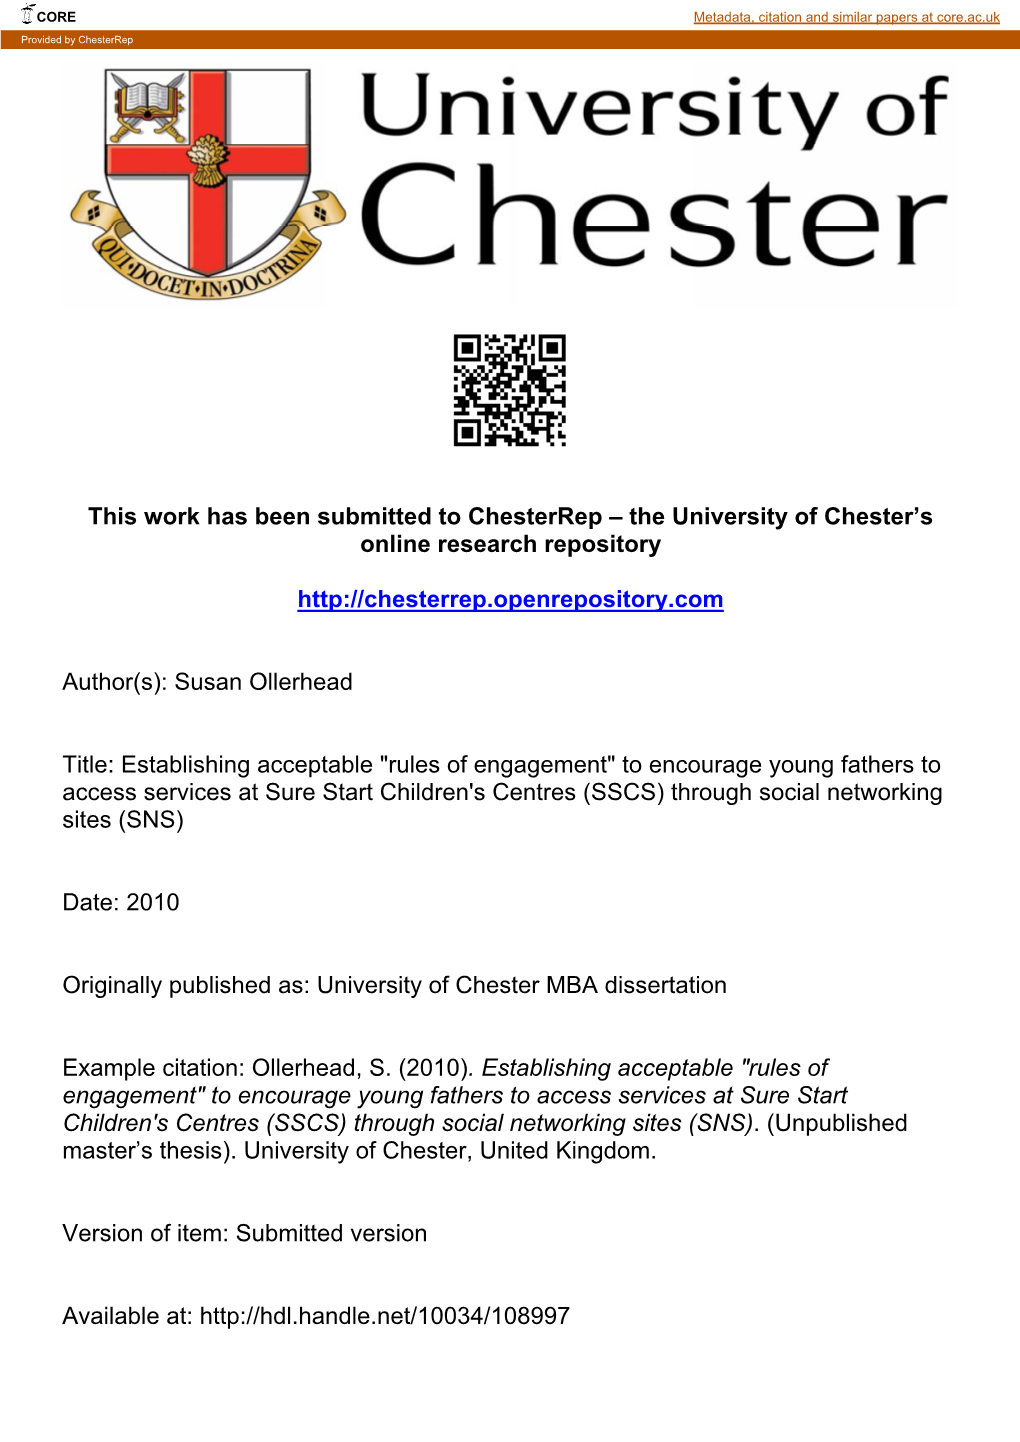 This Work Has Been Submitted to Chesterrep – the University of Chester's Online Research Repository